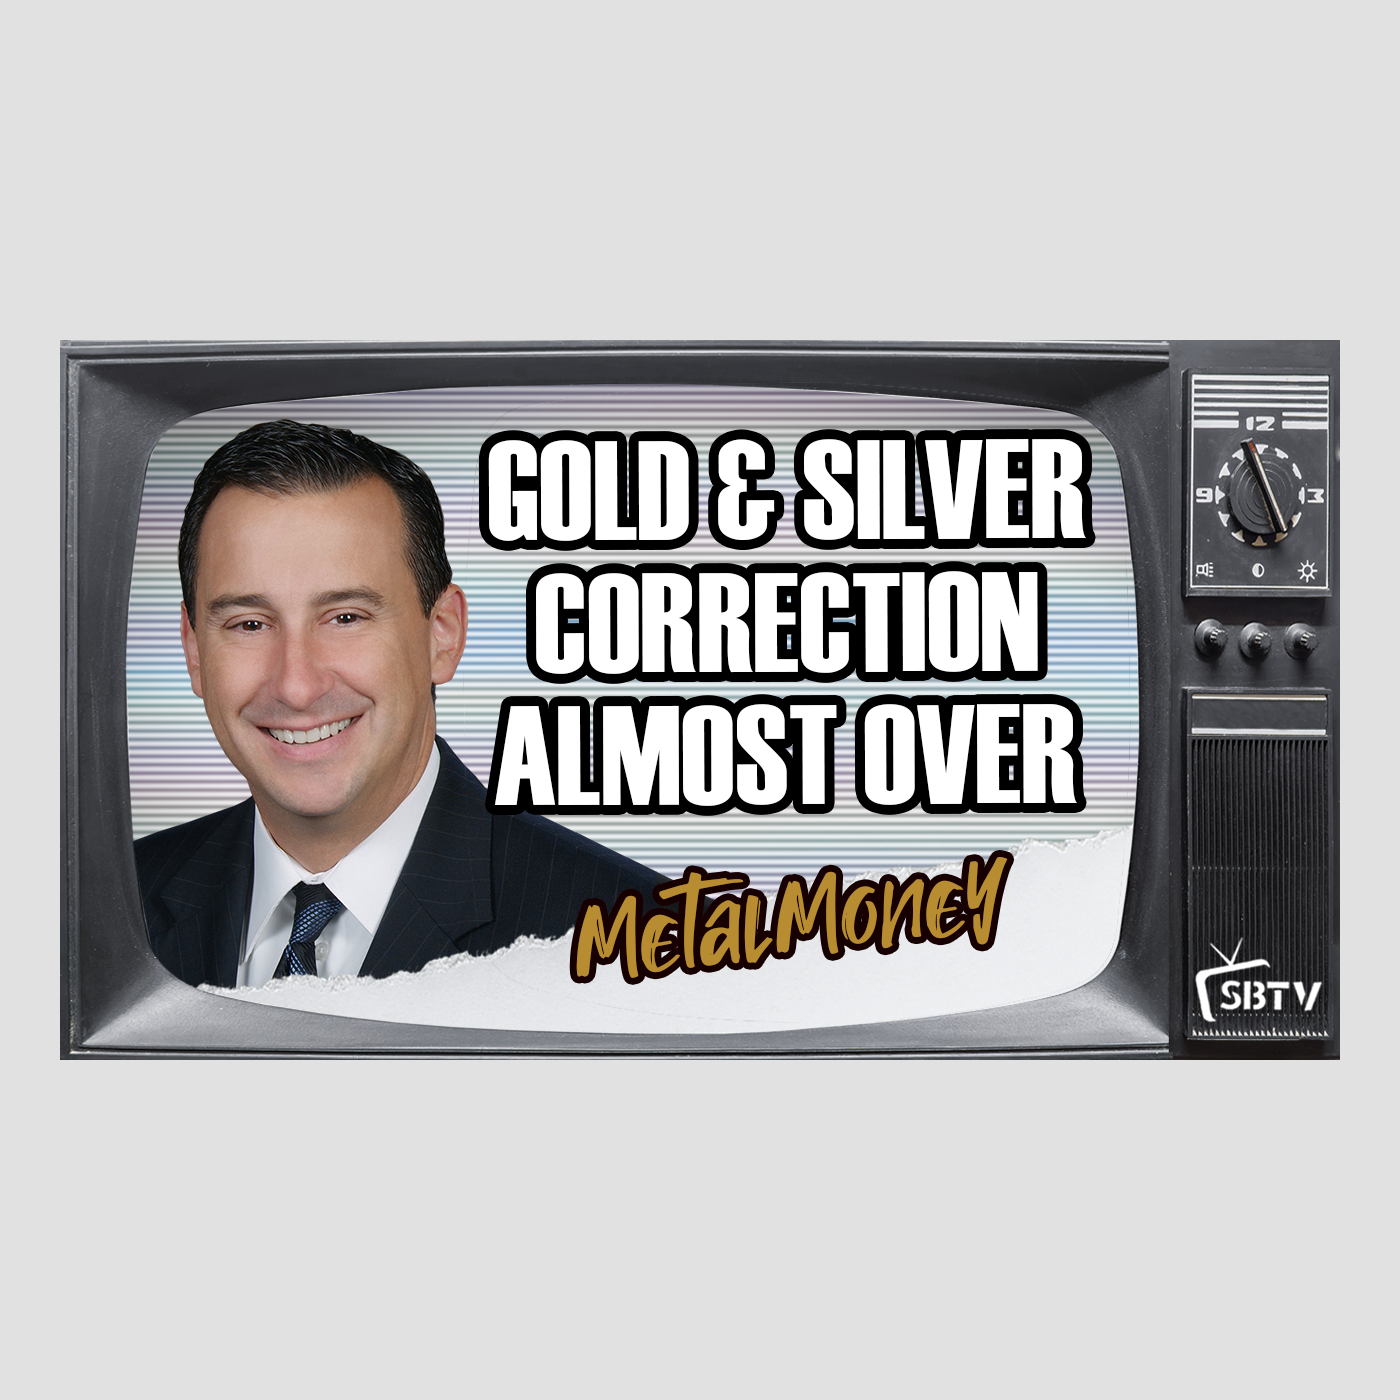 MM05 Craig Hemke: Correction in Gold and Silver to End in November, Higher 'Notable' Prices in 2021